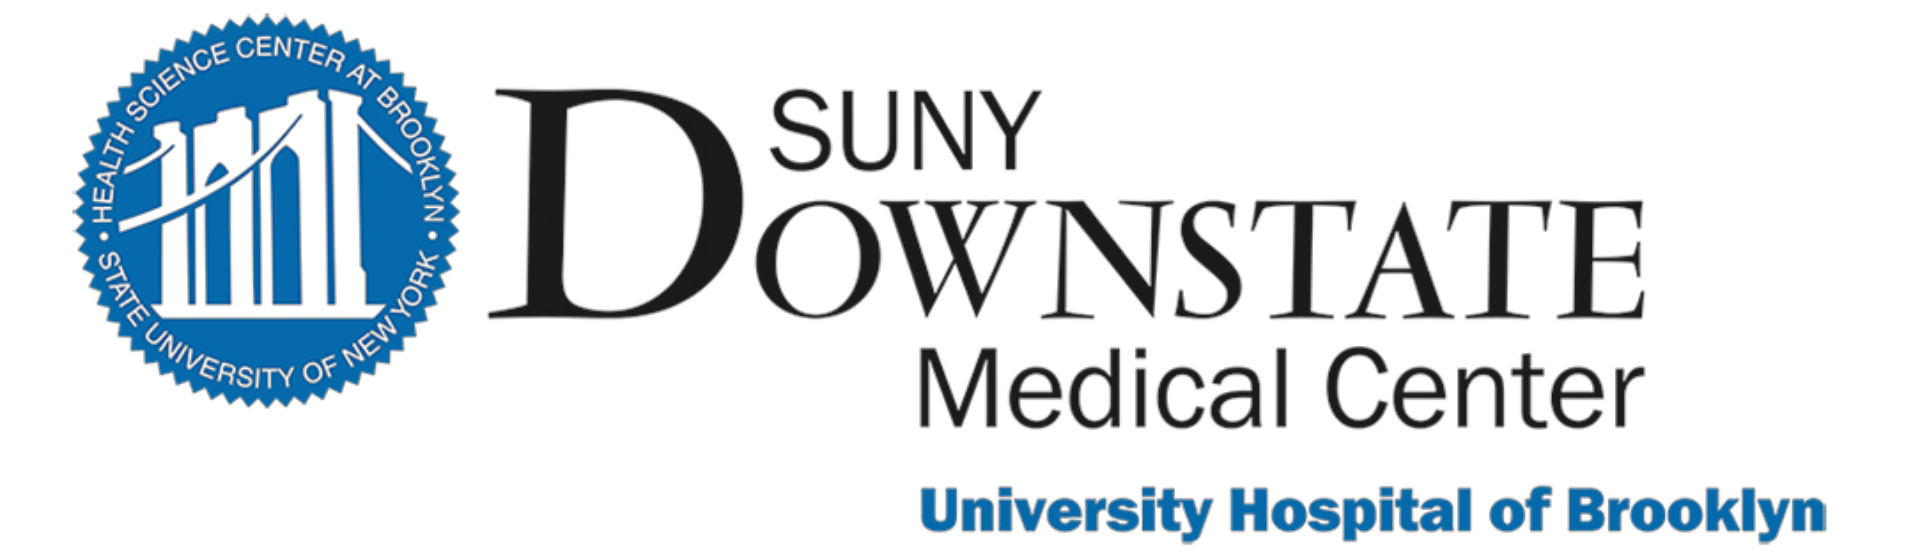 SUNY Downstate Medical Center & Well Screen